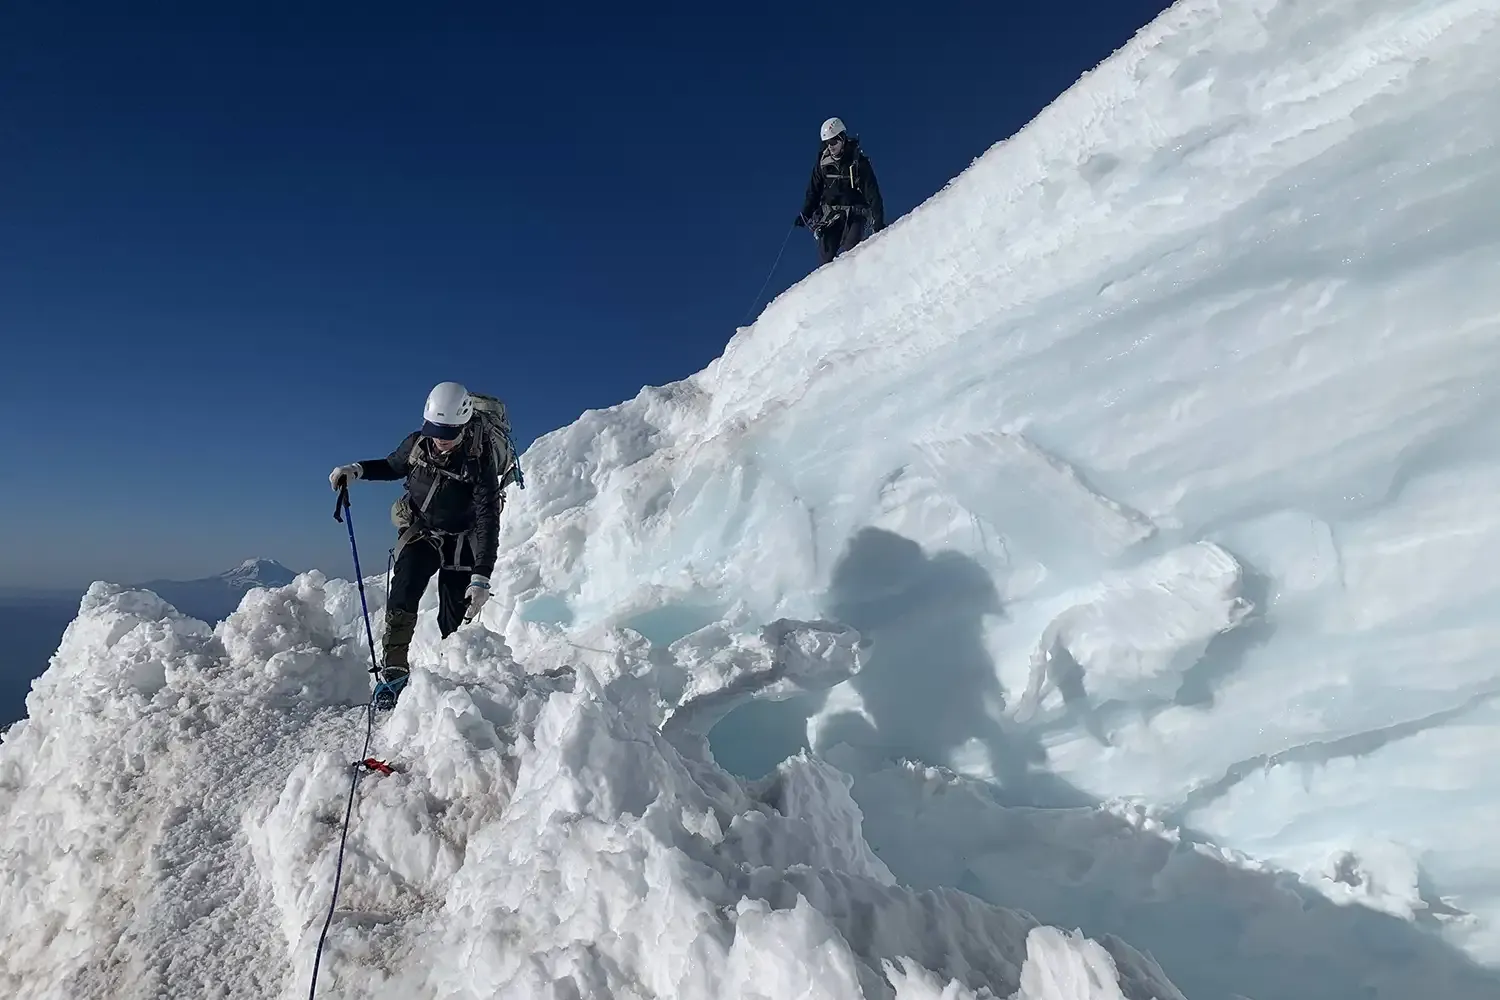 angie's friends shown climbing down a technical snowy mountain